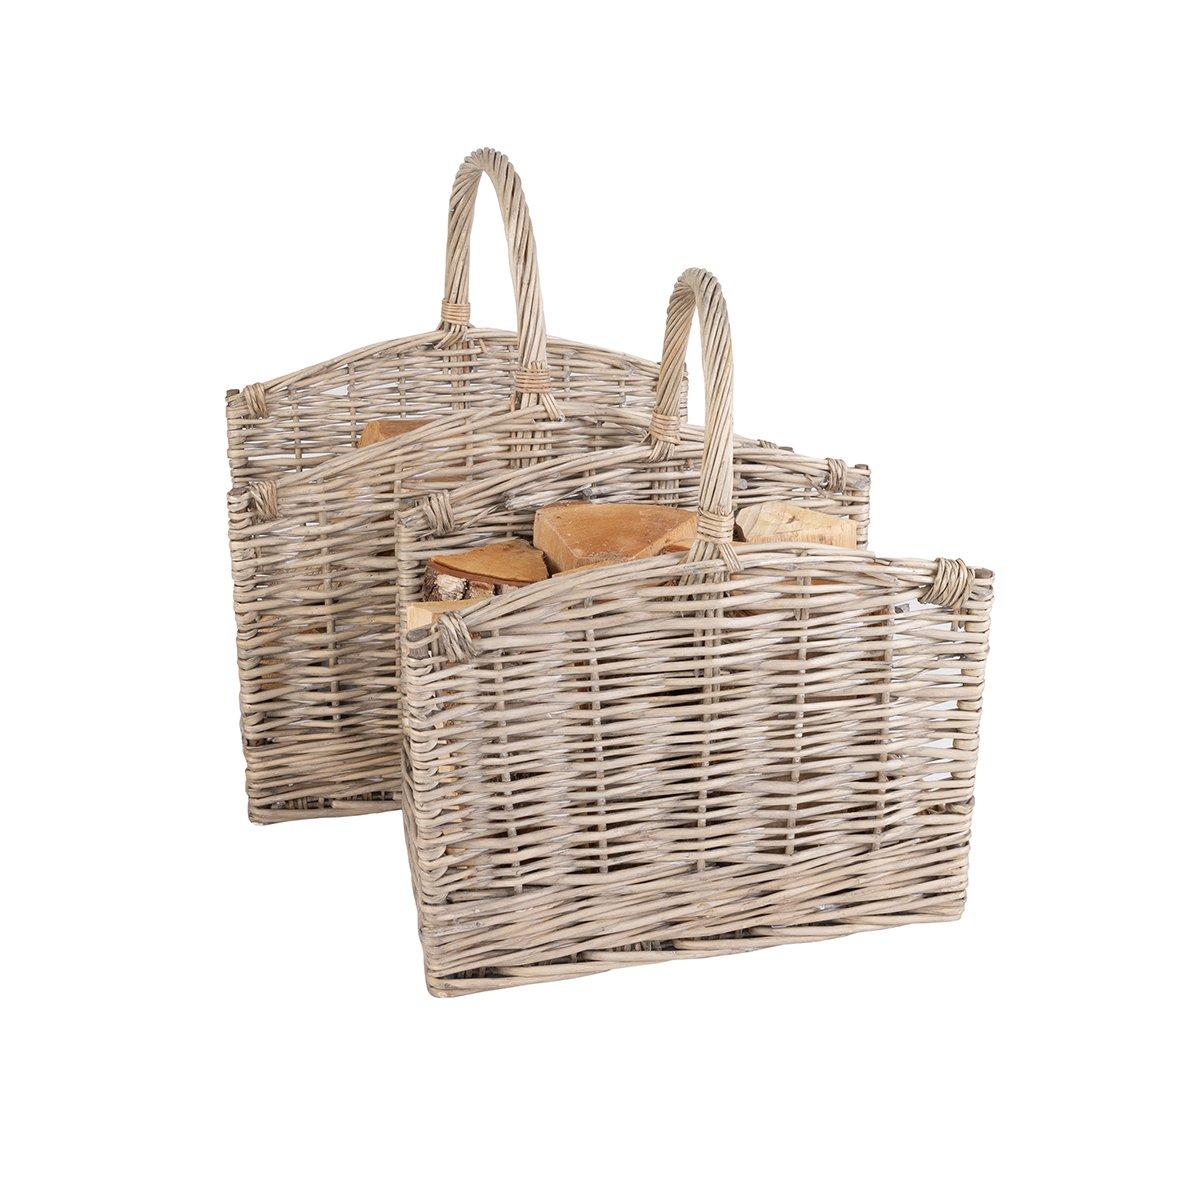 Snug Bamboo Set Of Two Open Ended Wicker Baskets Handmade